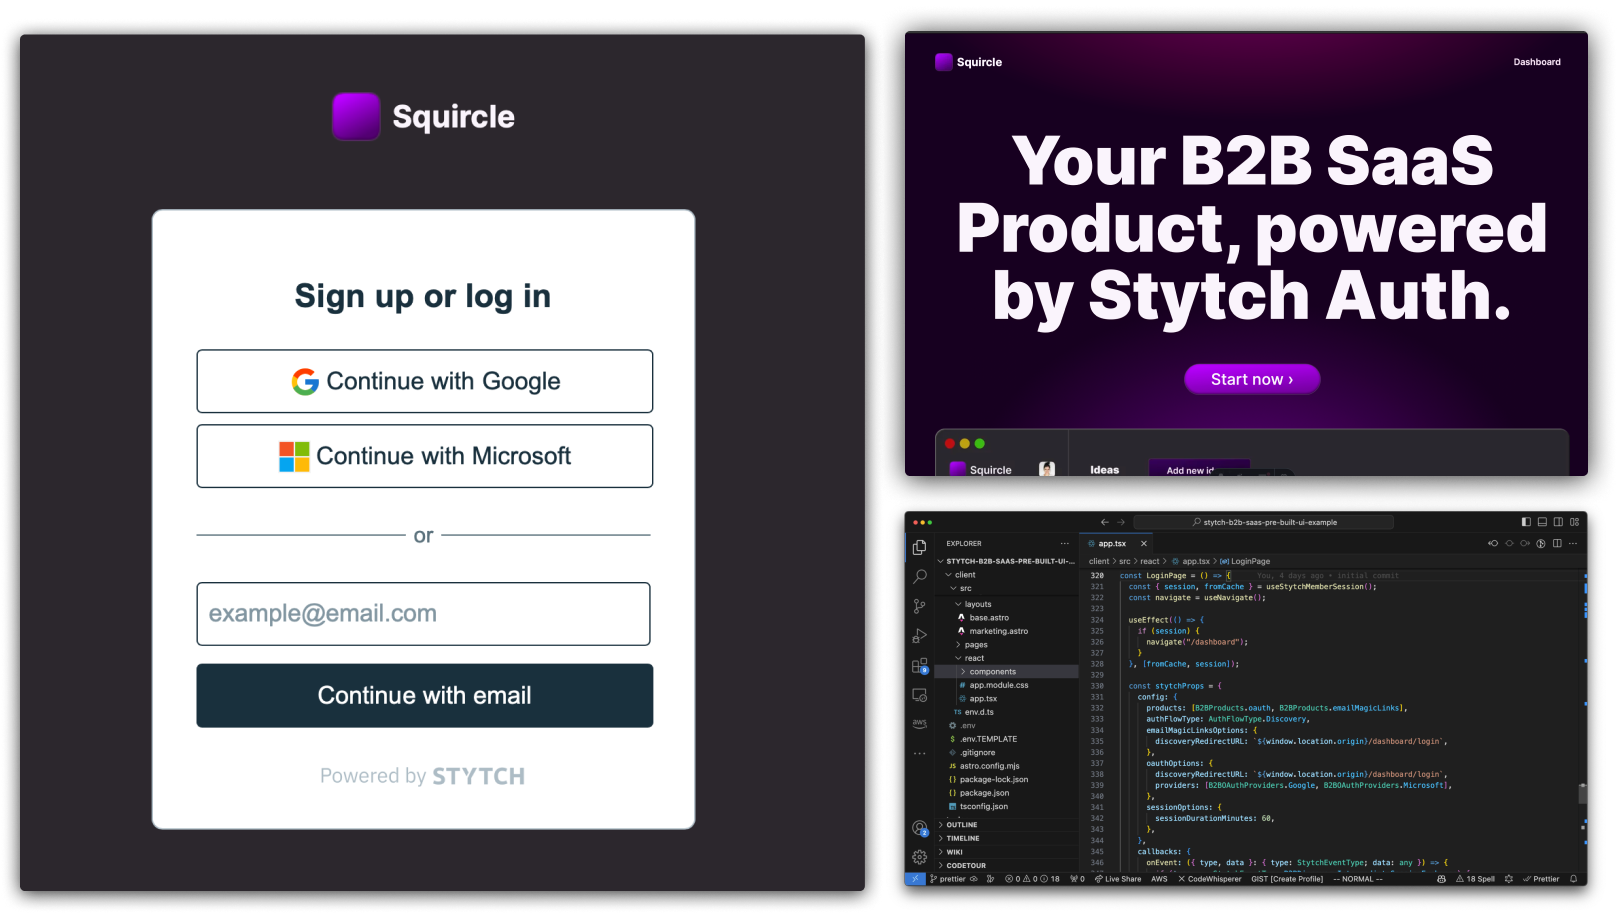 Preview images of the Stytch B2B SaaS Example App